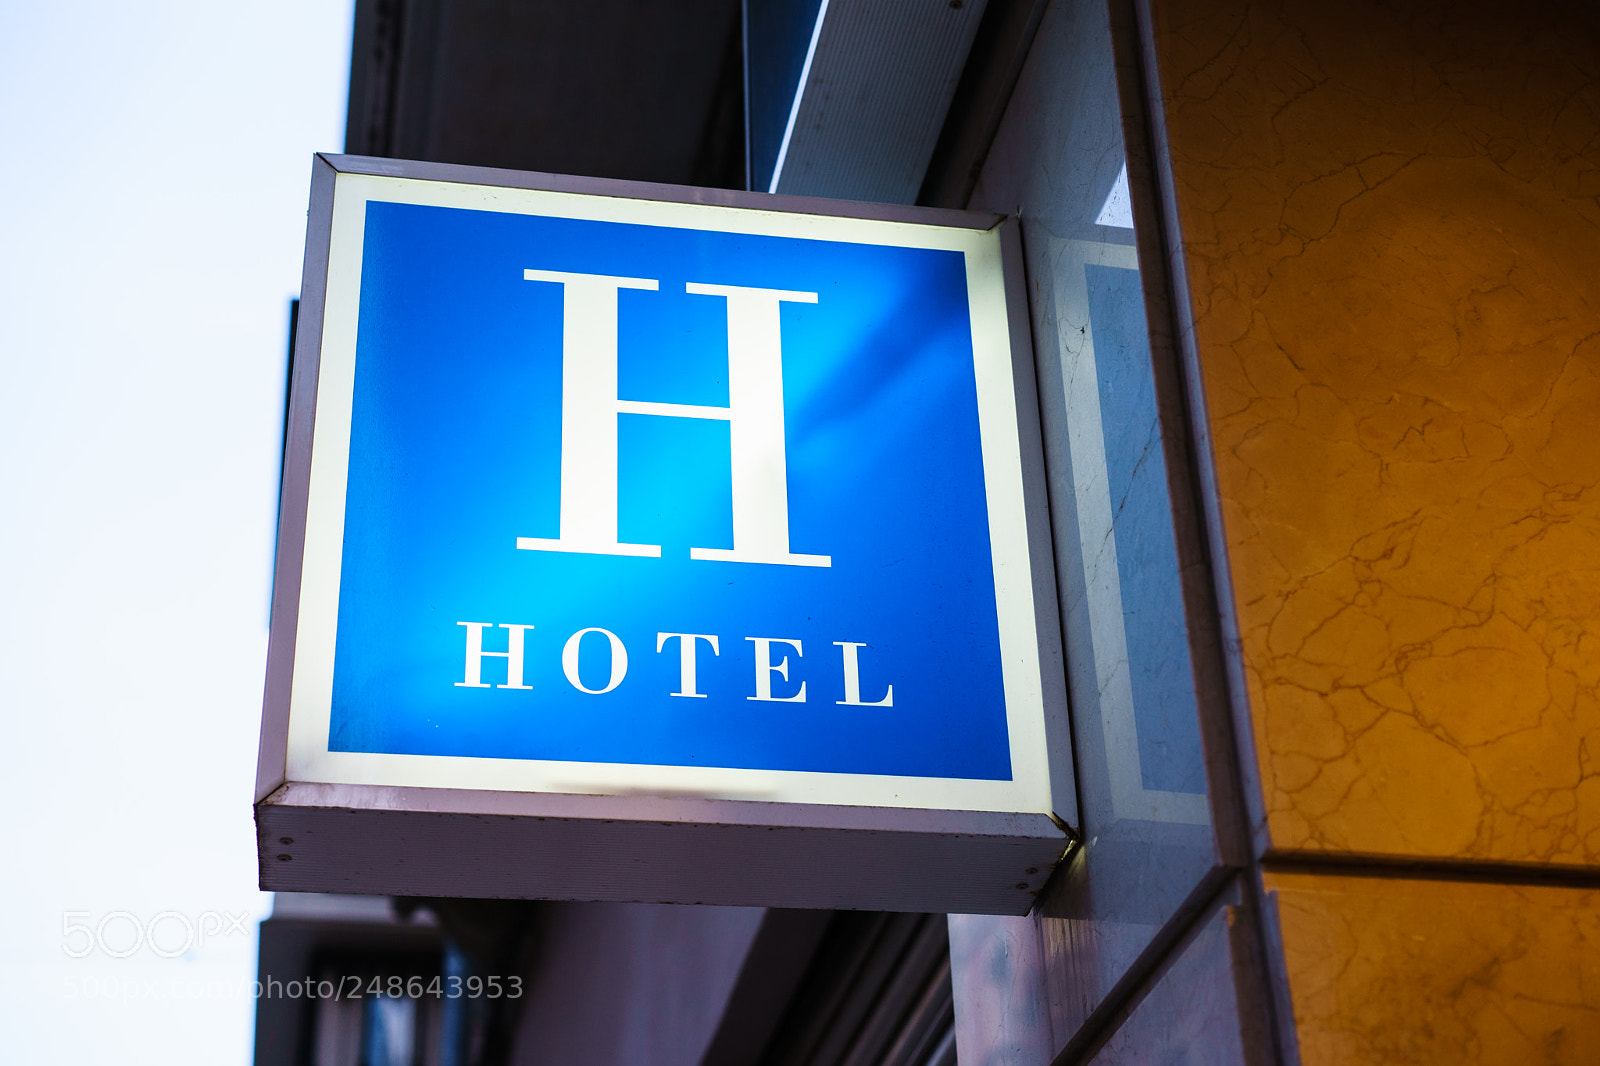 Sony a7 II sample photo. Hotel sign on wall photography